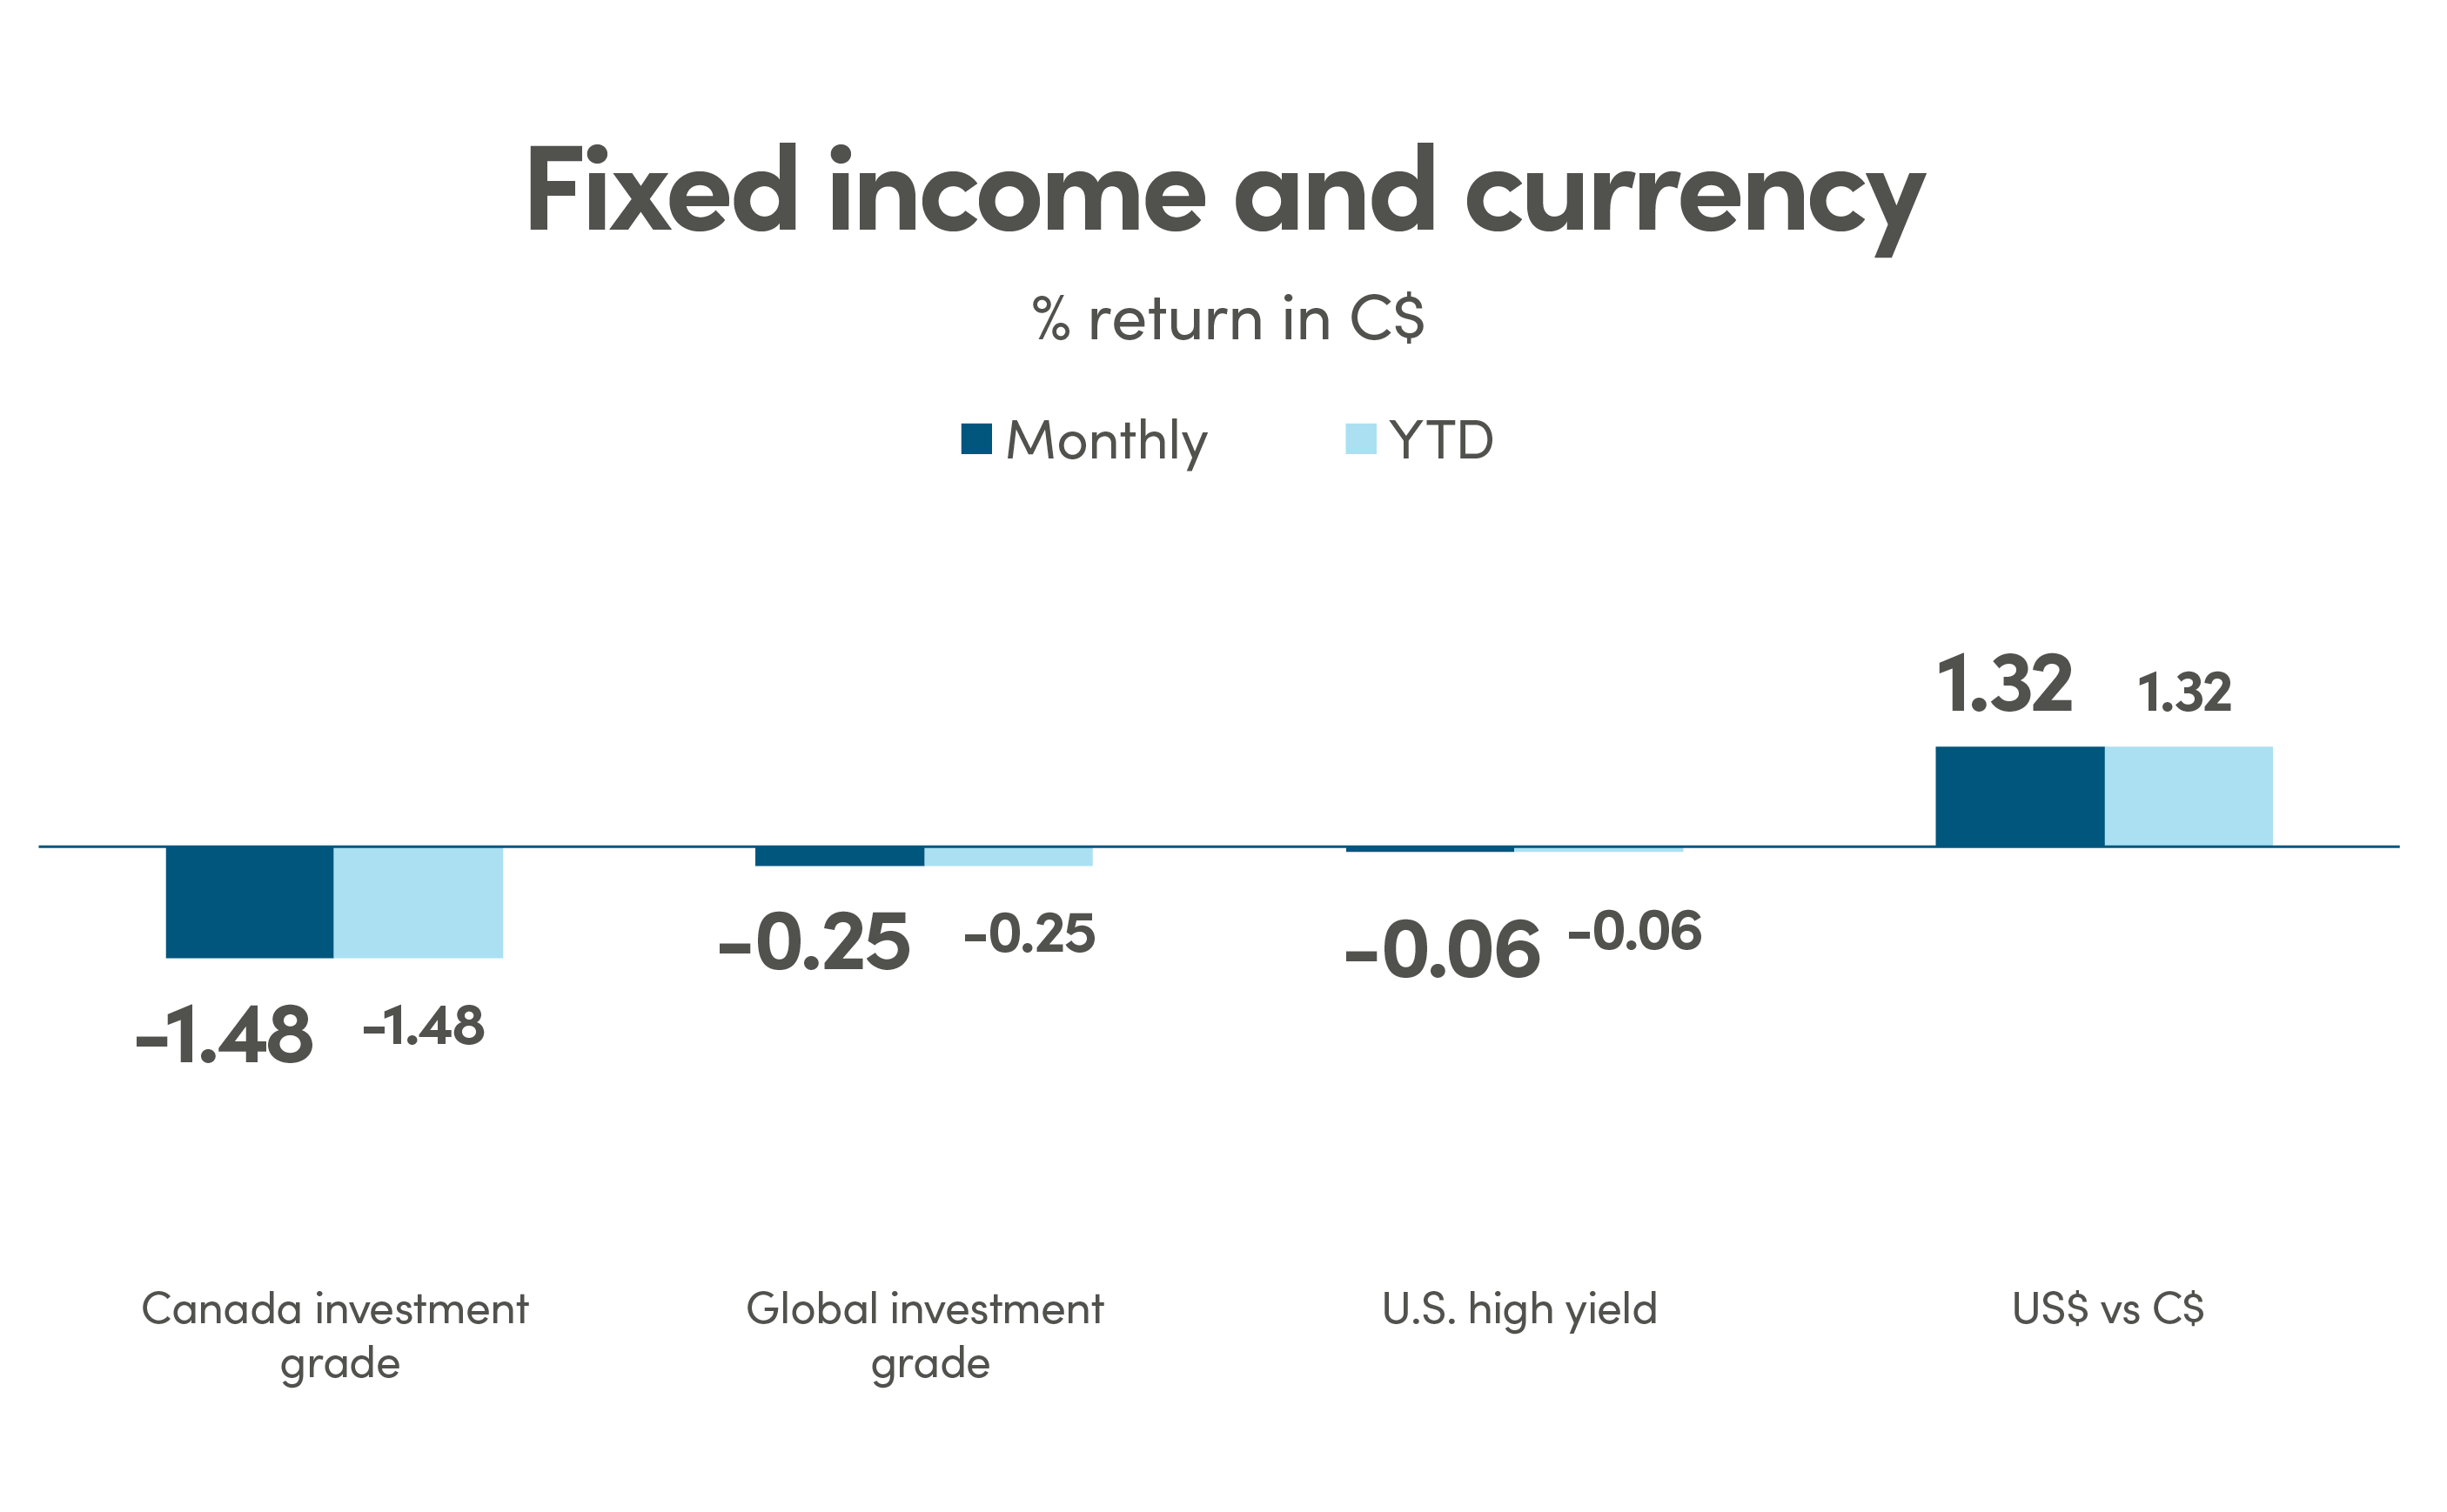 Bar graph showing % return in CAD (C$) for fixed income and currency. Canada investment grade monthly return and YTD is -1.48%. Global investment grade monthly return and YTD is -0.25%. US high yield monthly return and YTD is -0.06%. US$ vs C$ monthly return and YTD is 1.32%